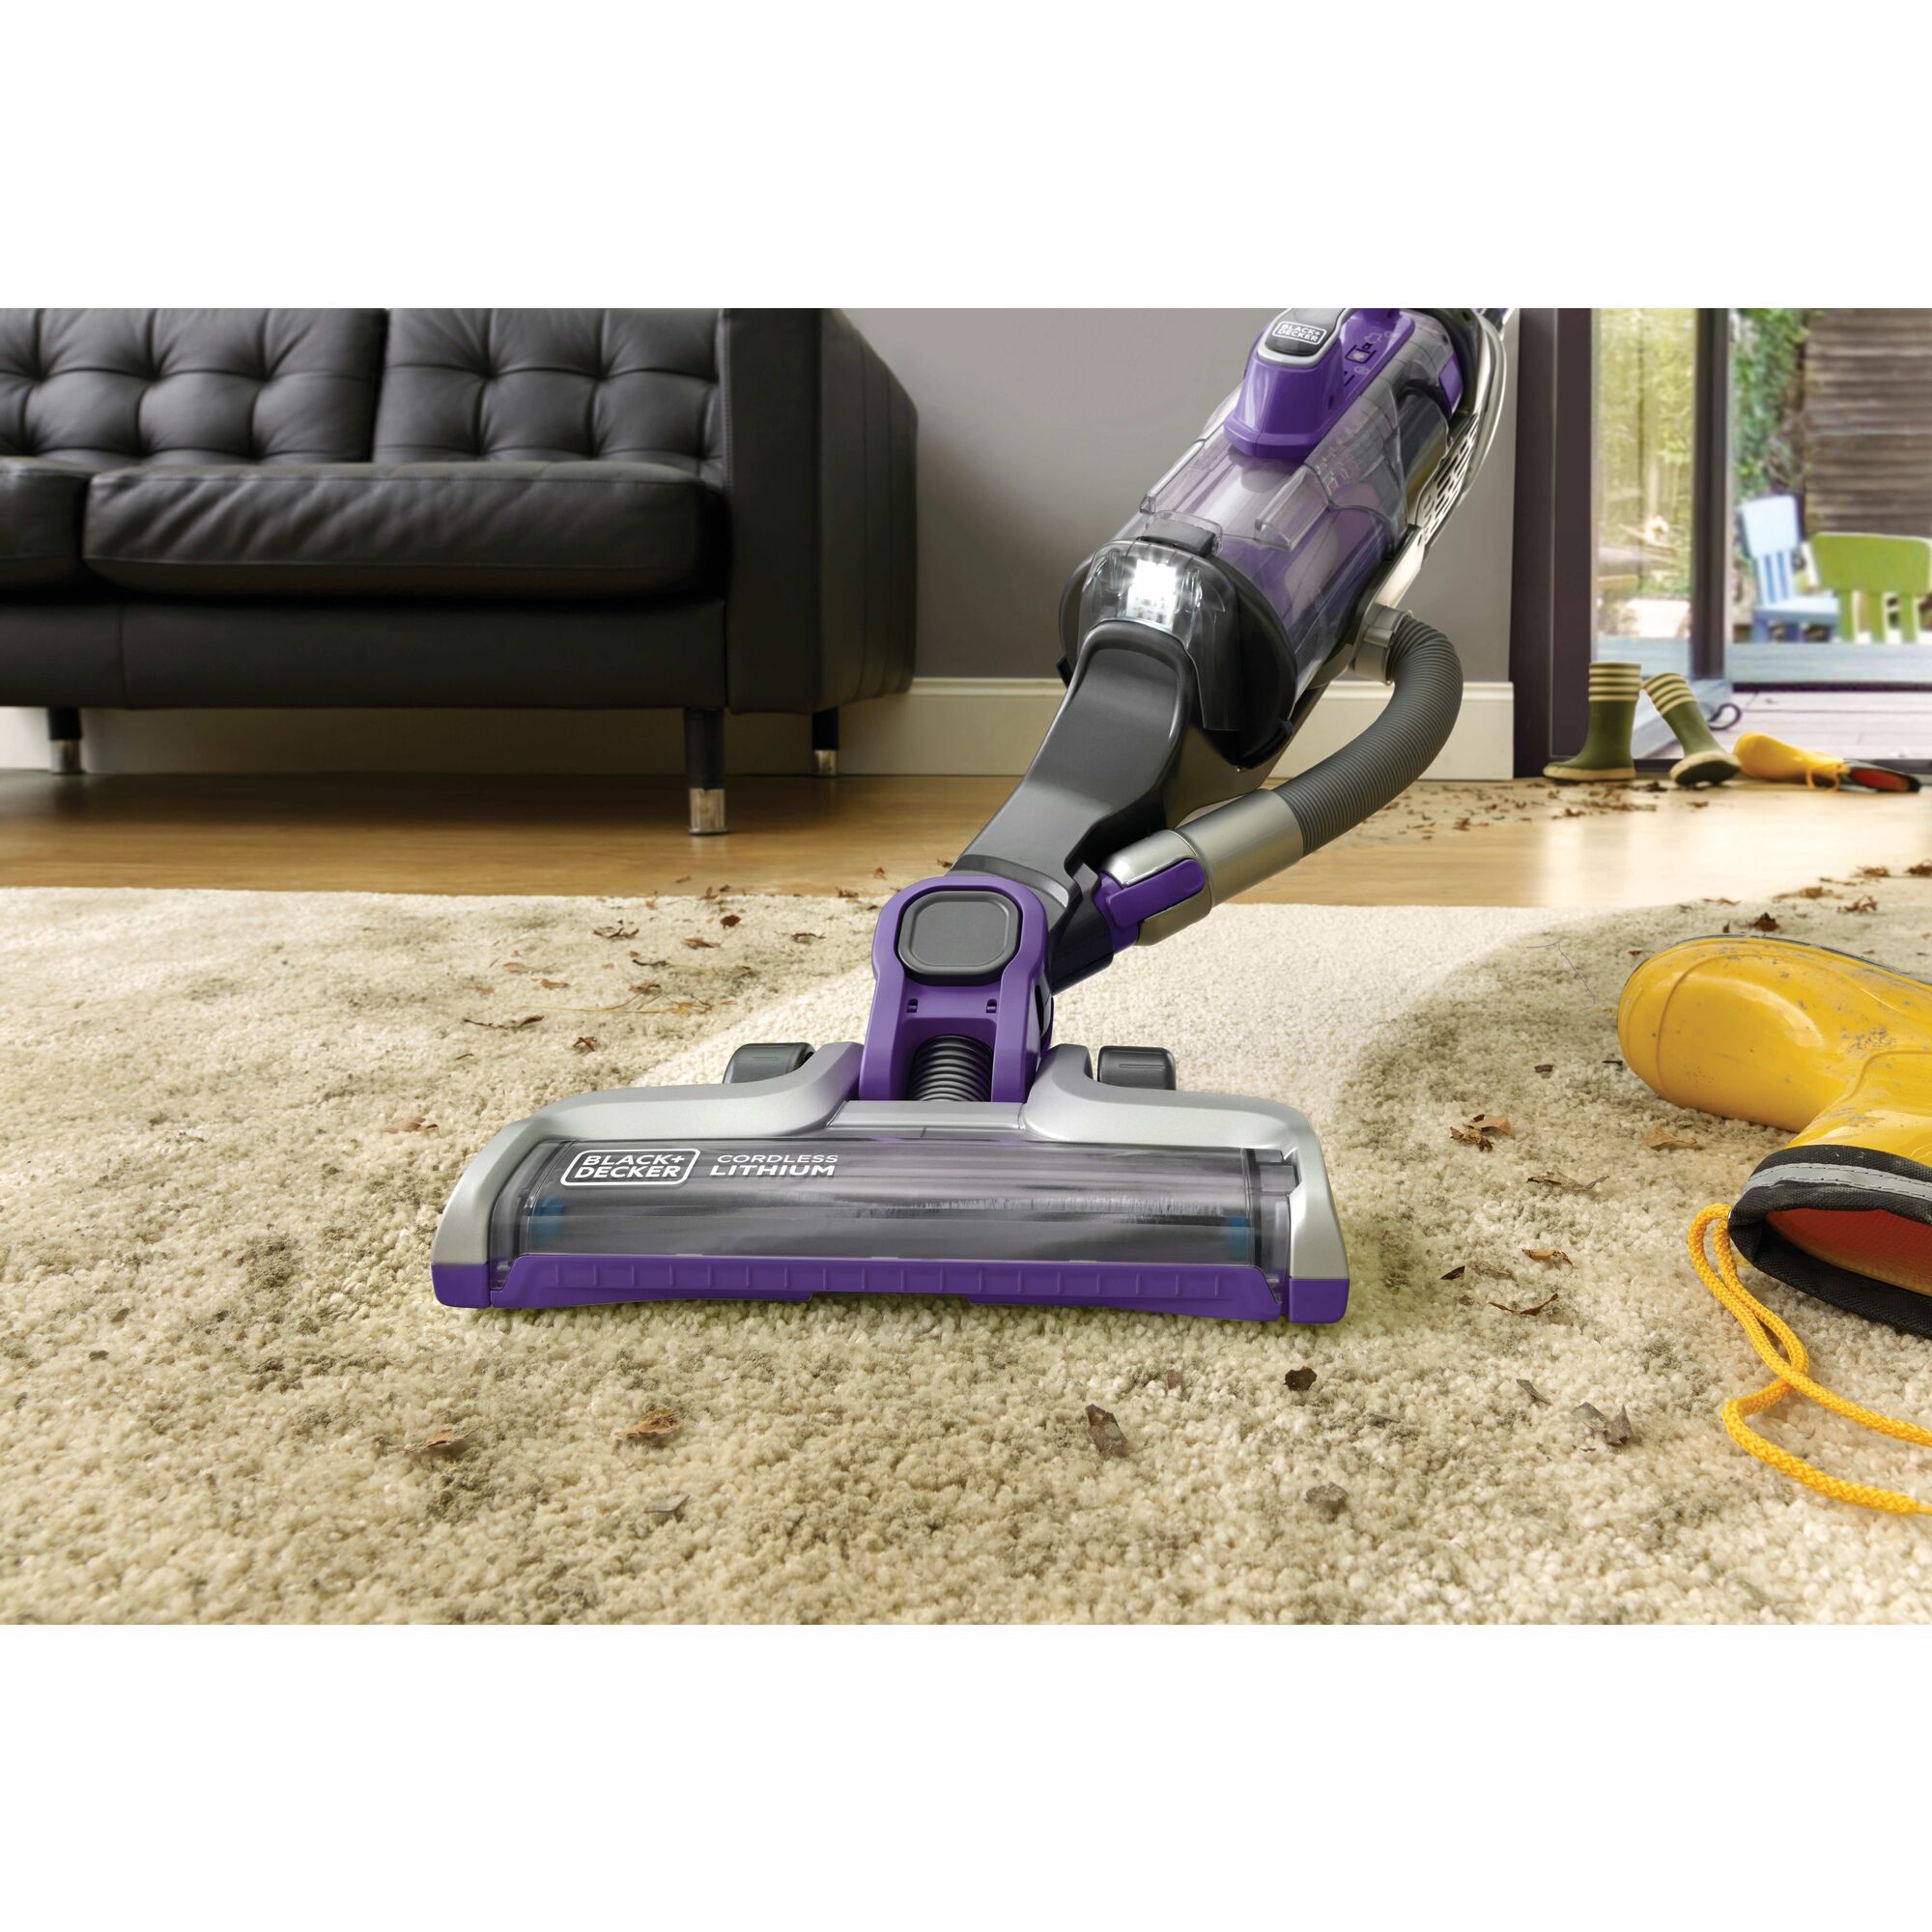 POWER SERIES PRO Cordless 2 in 1 Pet Vacuum being used to clean pet hair from rug.